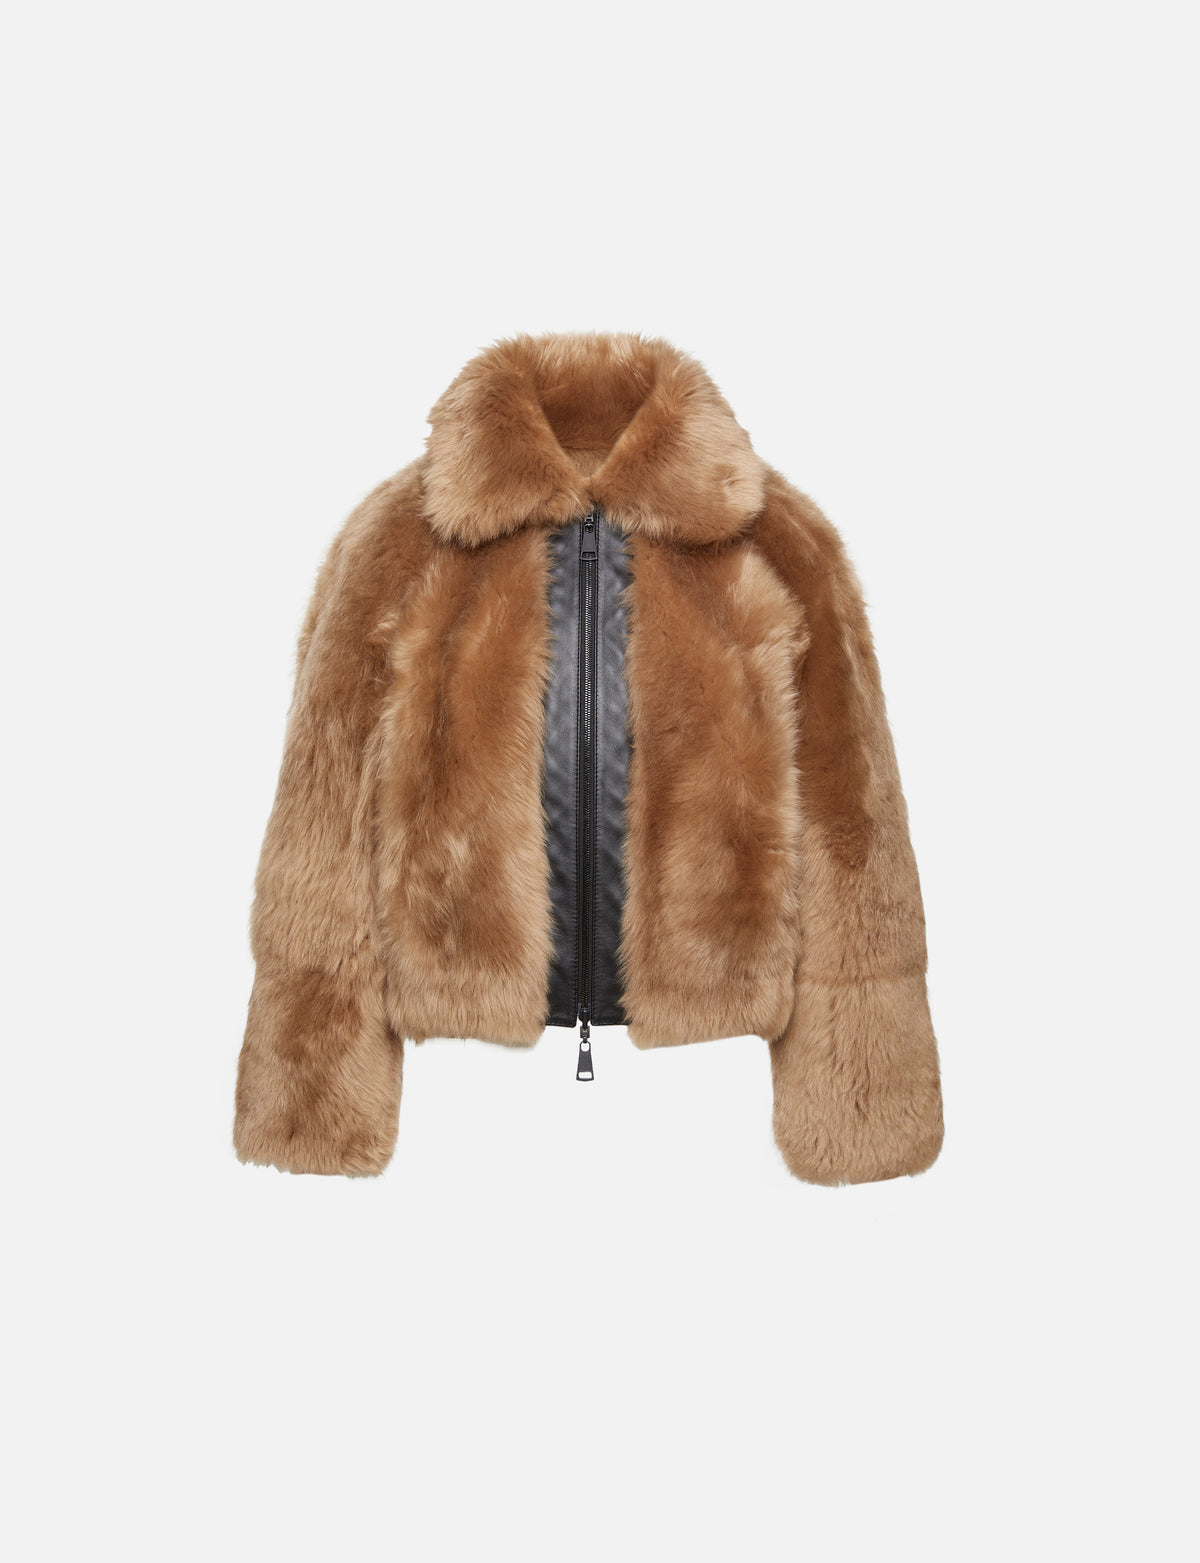 view 1 - Shearling Bomber